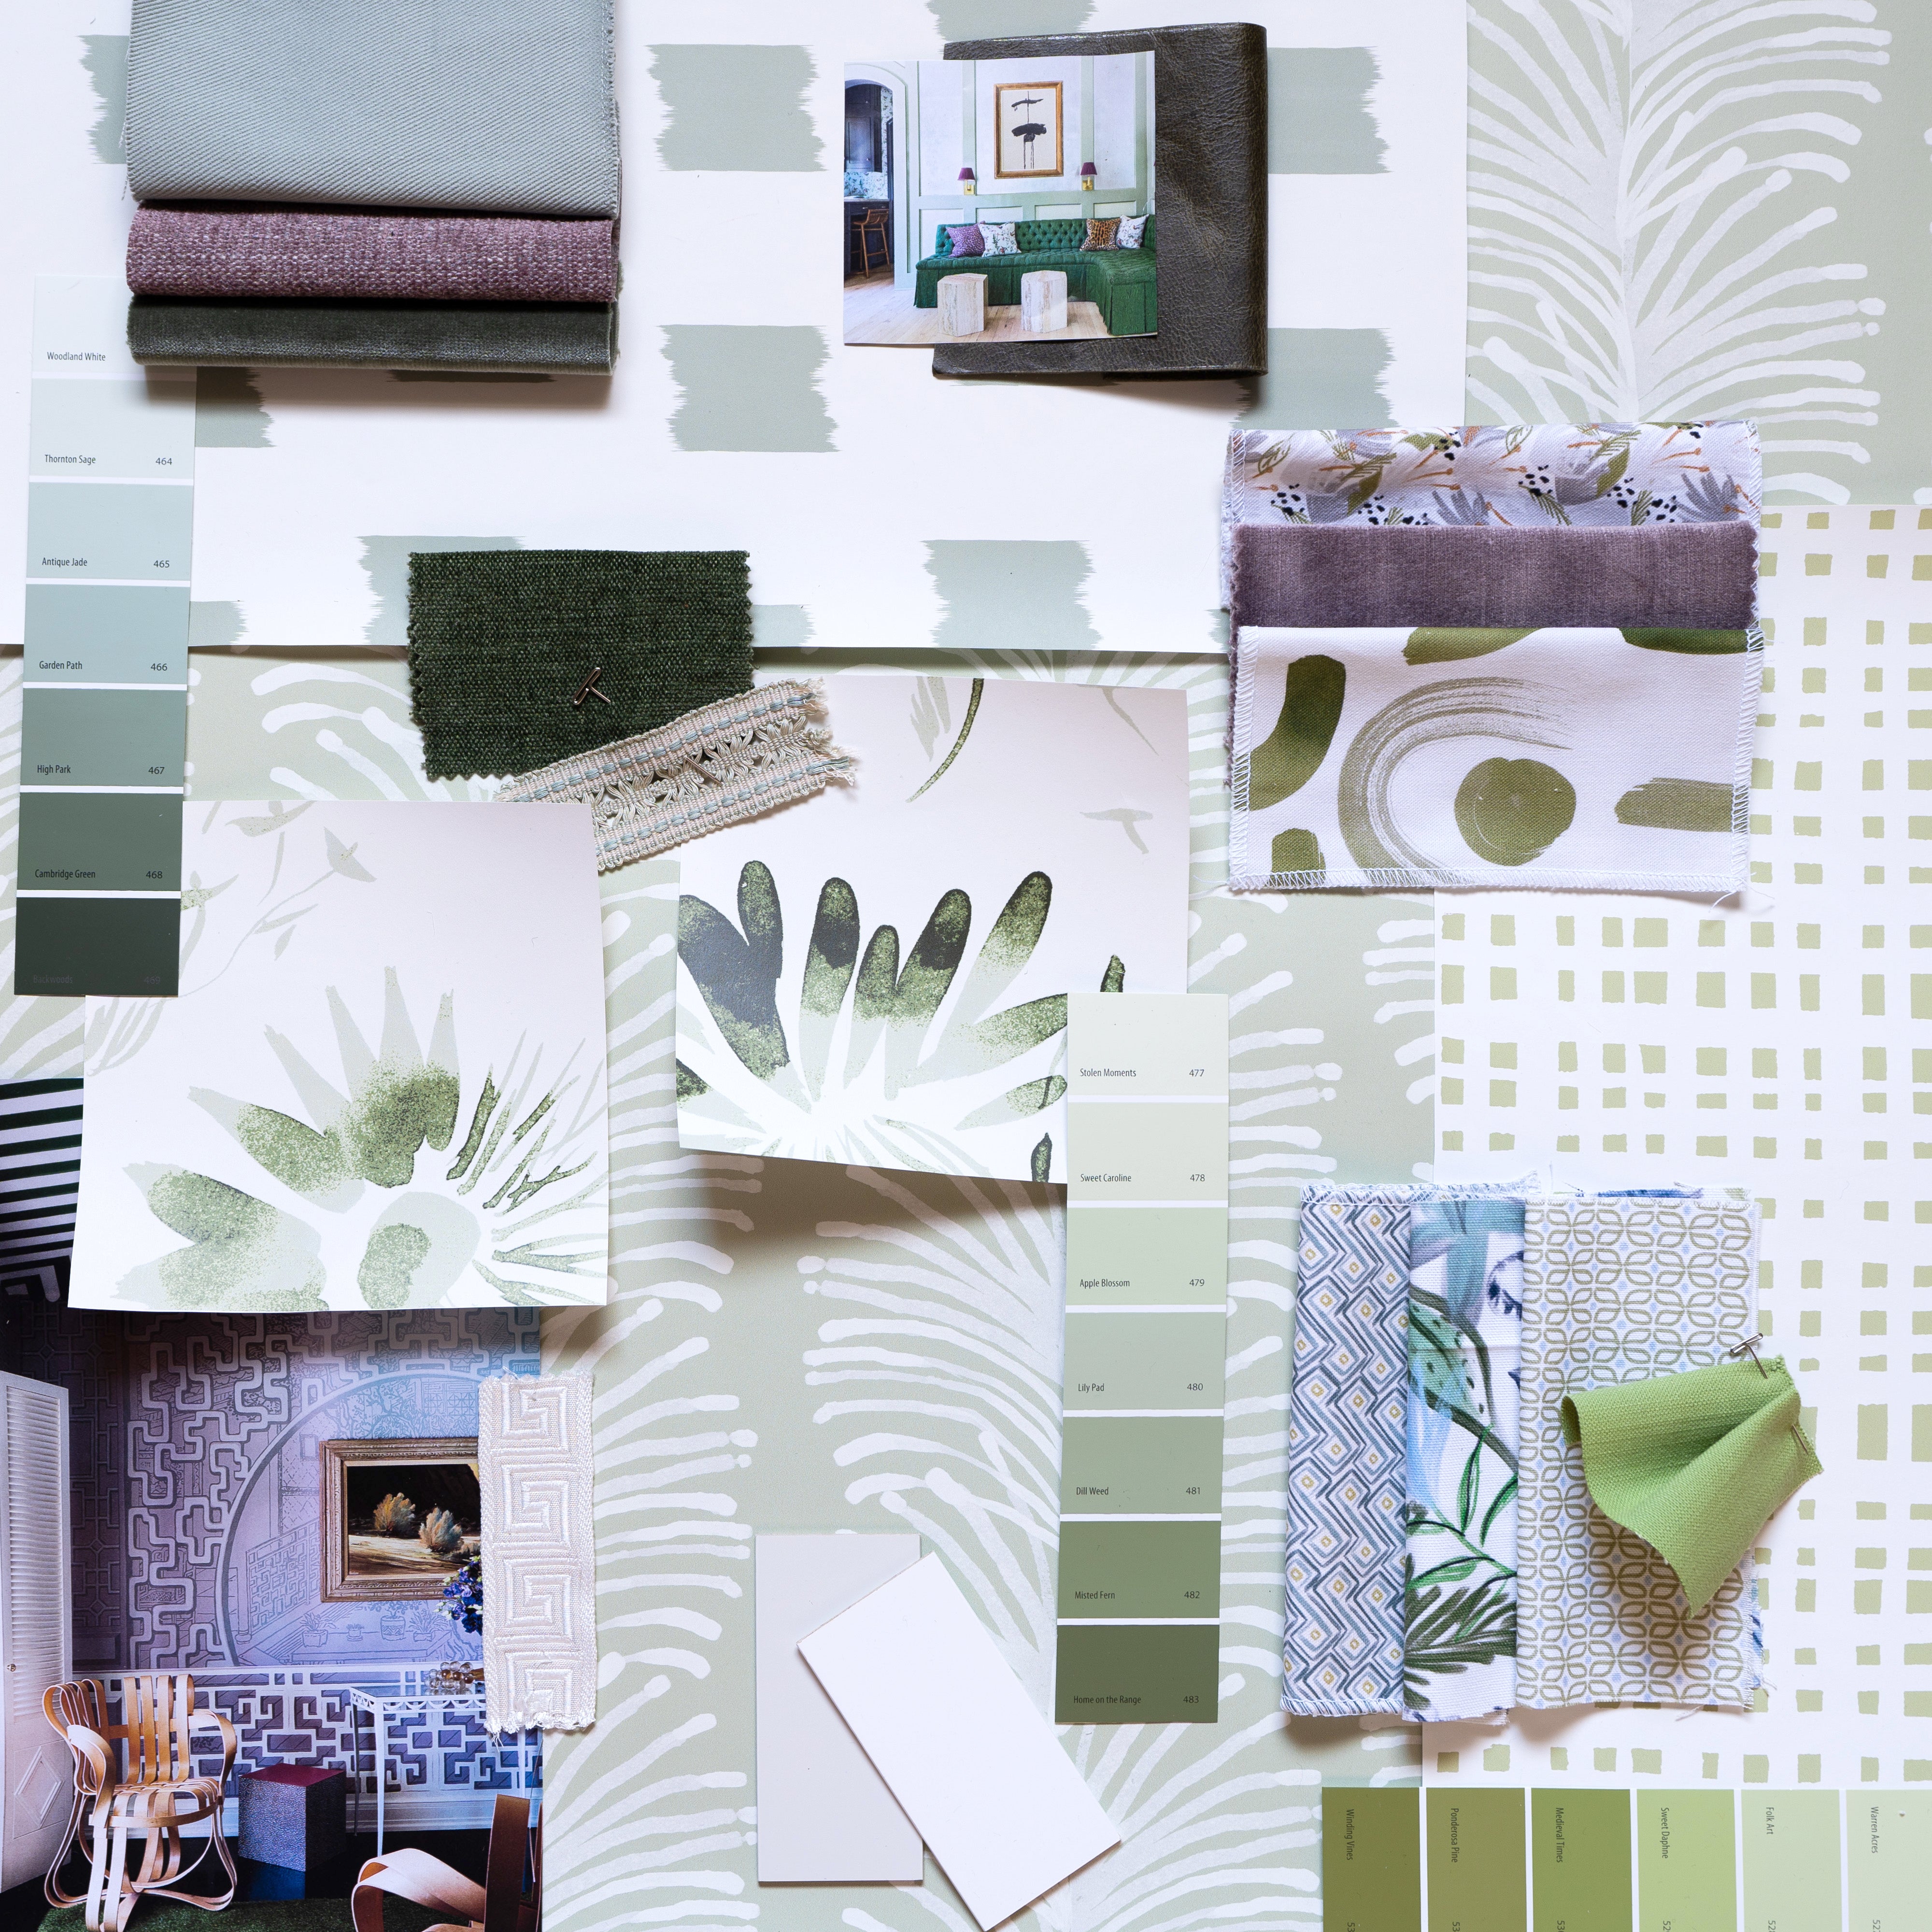 Interior Design Moodboard and Fabric Inspirations with Green Gingham Printed Swatch, Sage Green Swatch, and Sage Green Printed Swatch